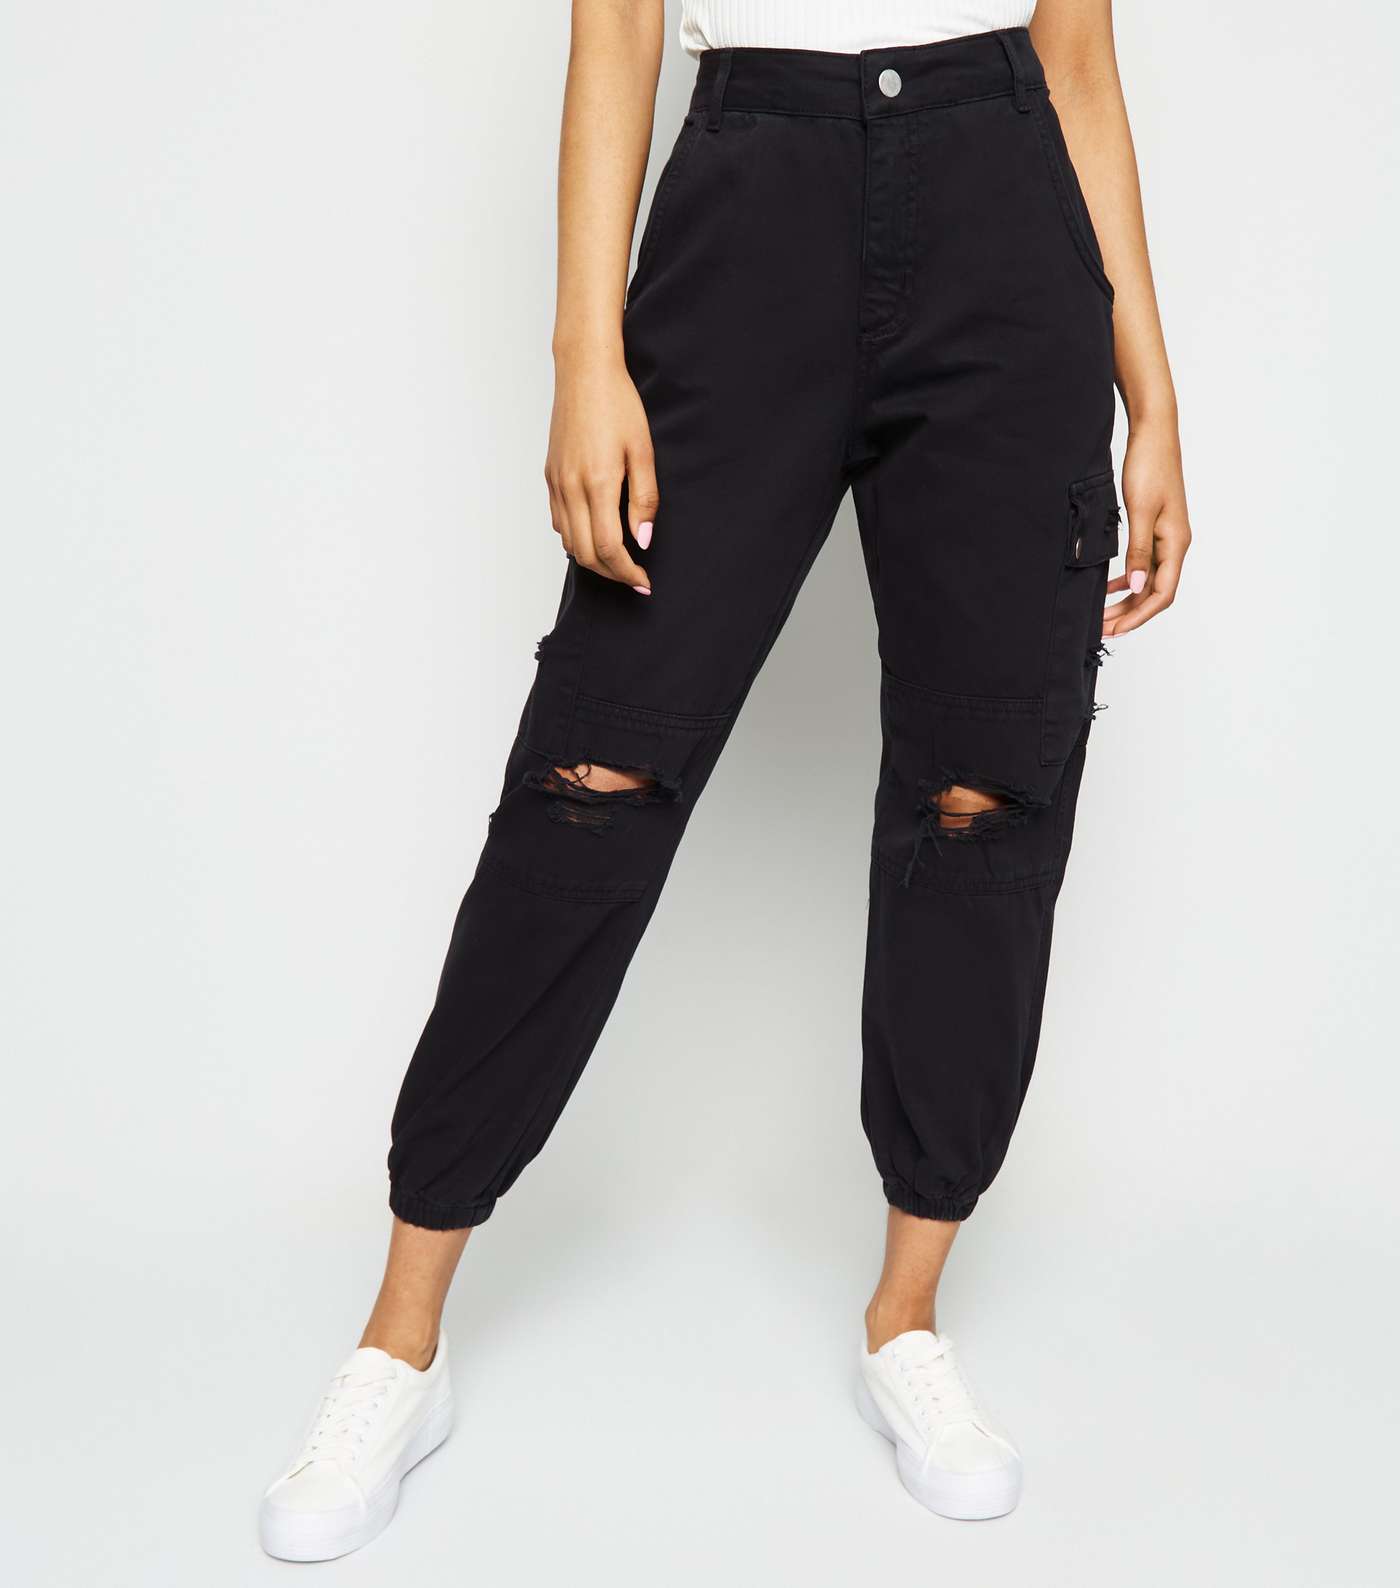 Petite Black Ripped Knee Utility Trousers Image 2